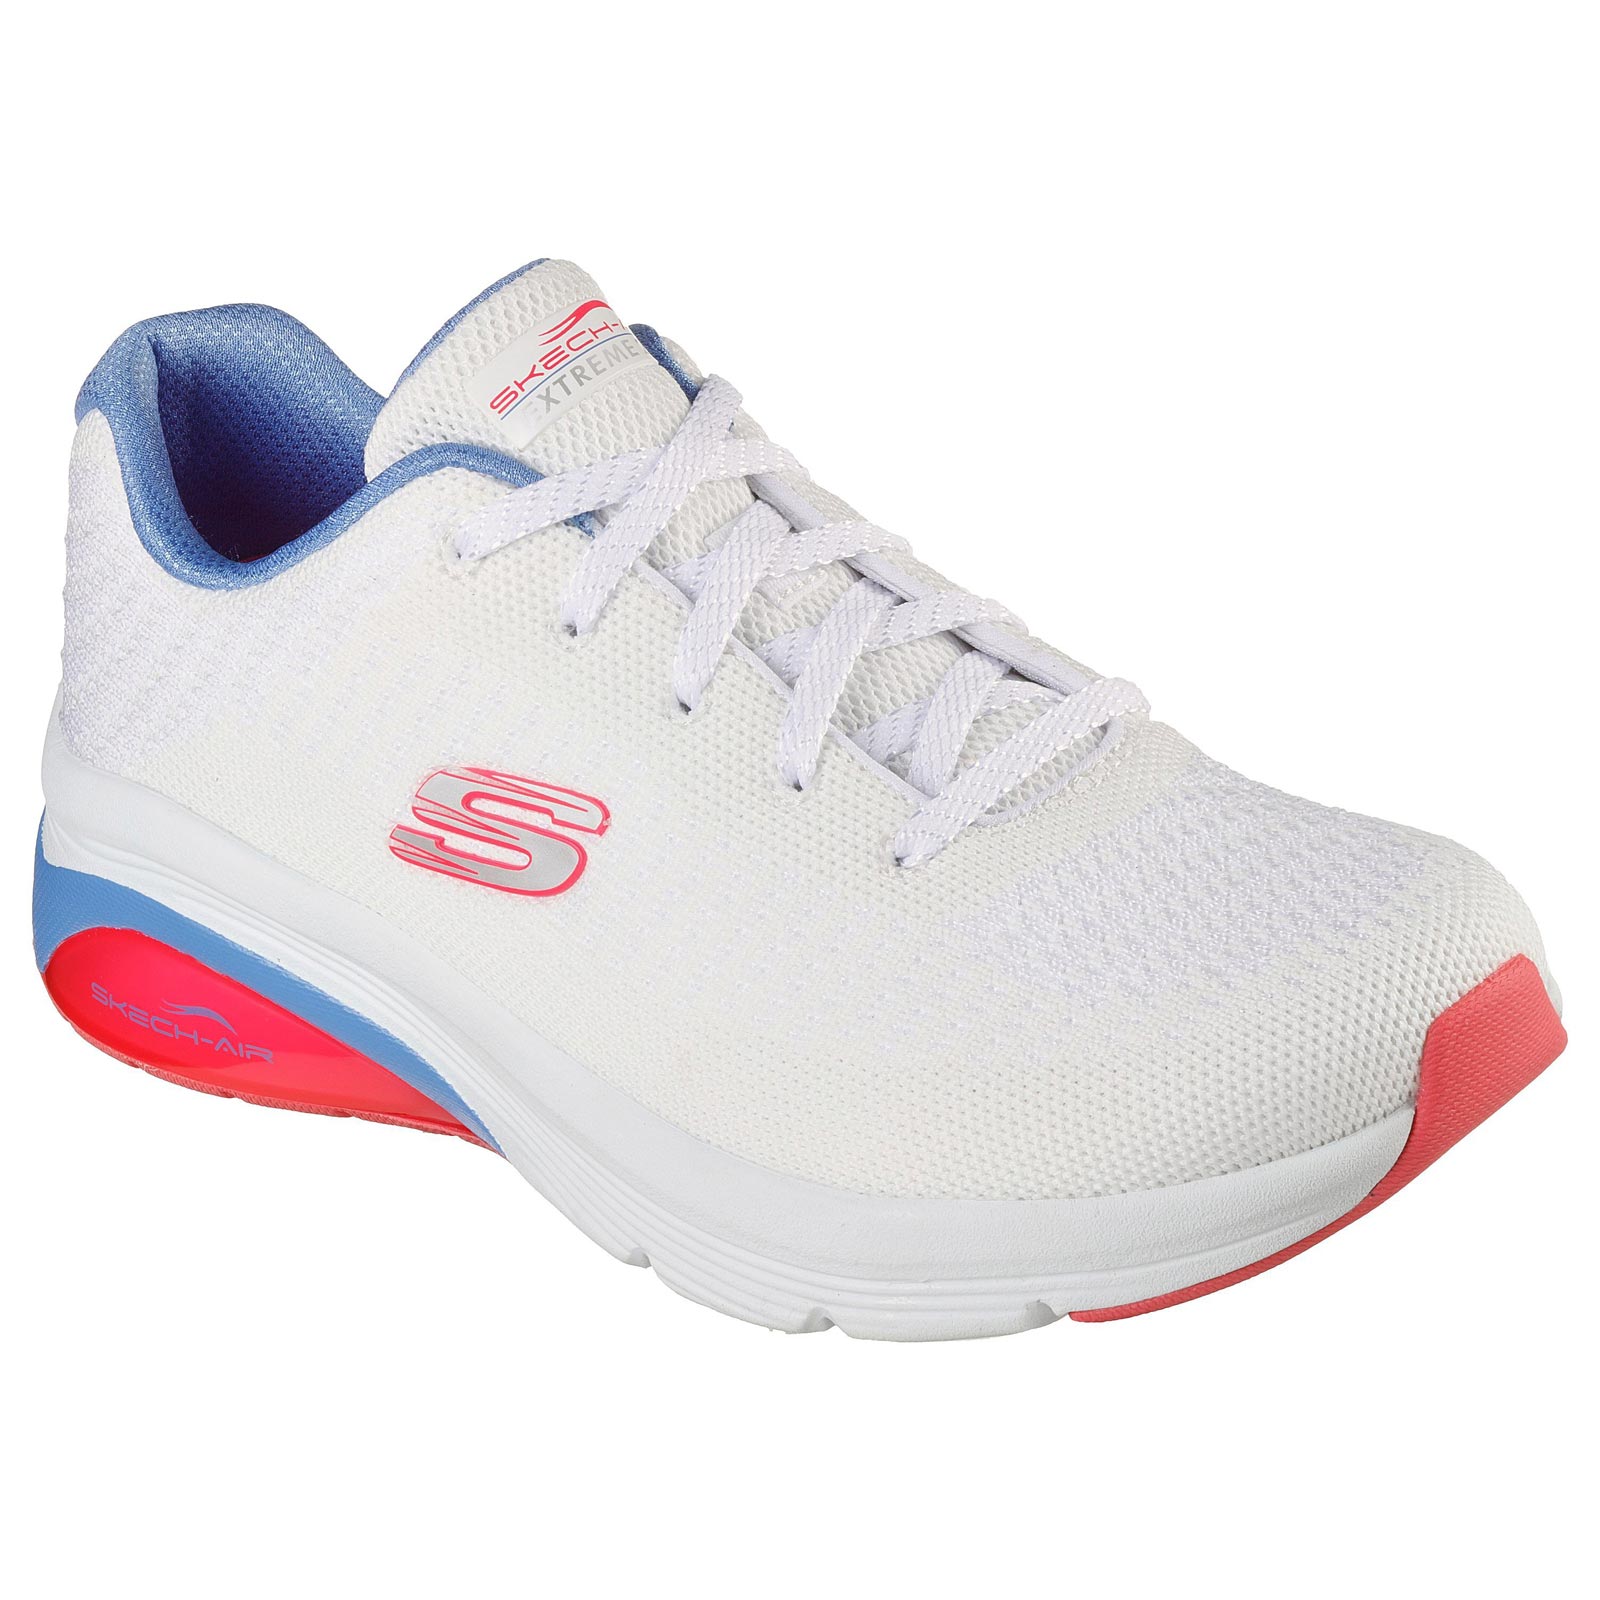 SKECHERS SKECH-AIR EXTREME 2.0 WOMENS SHOES